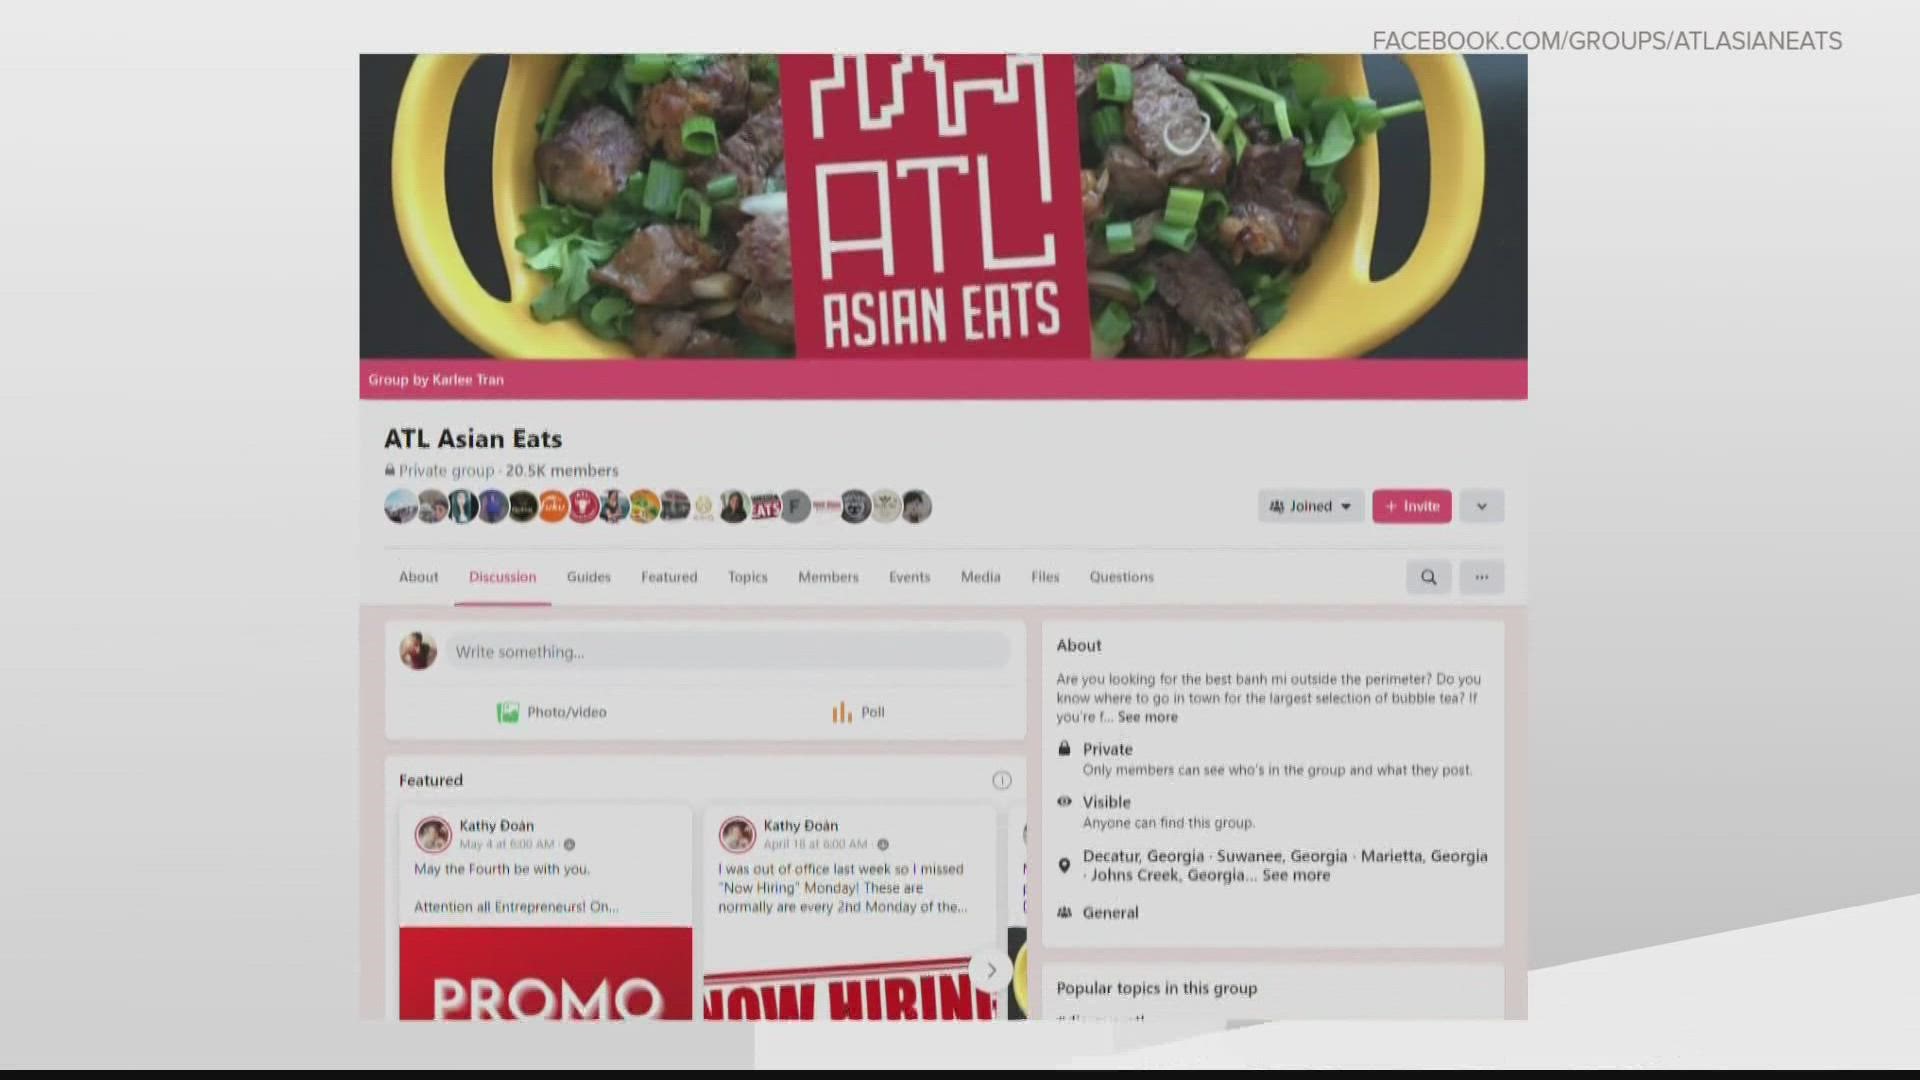 ATL Asian Eats has 20,000 members and continues to grow.